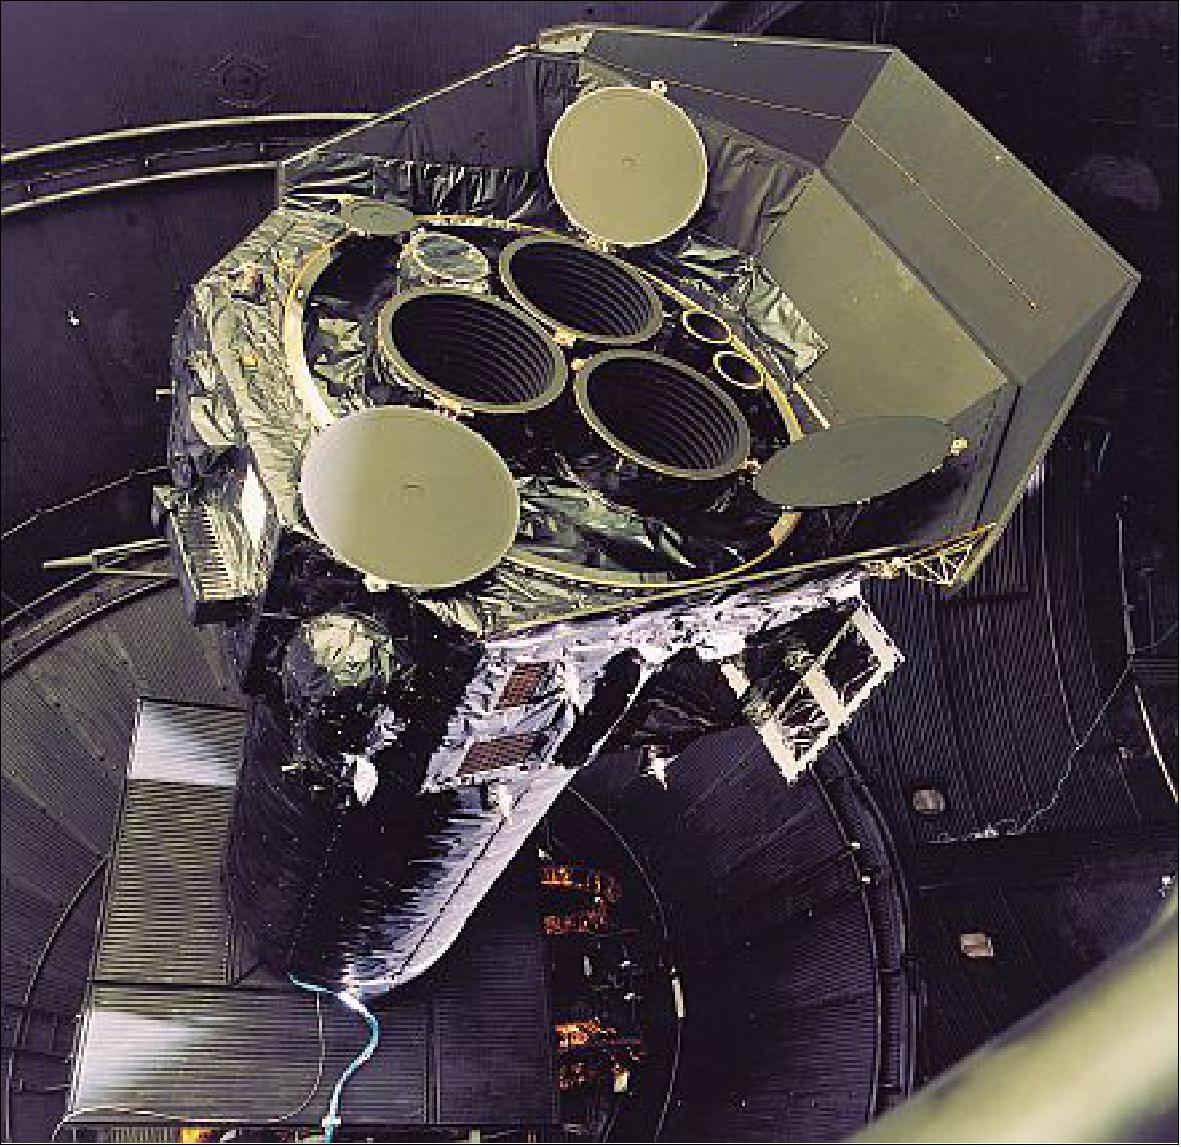 Figure 13: The XMM PFM Lower Module in the Large Space Simulator at ESTEC (January 1999). The Telescope Sun Shield is deployed. The three Mirror Module doors and the Optical Monitor door are open (image credit: ESA) 14)